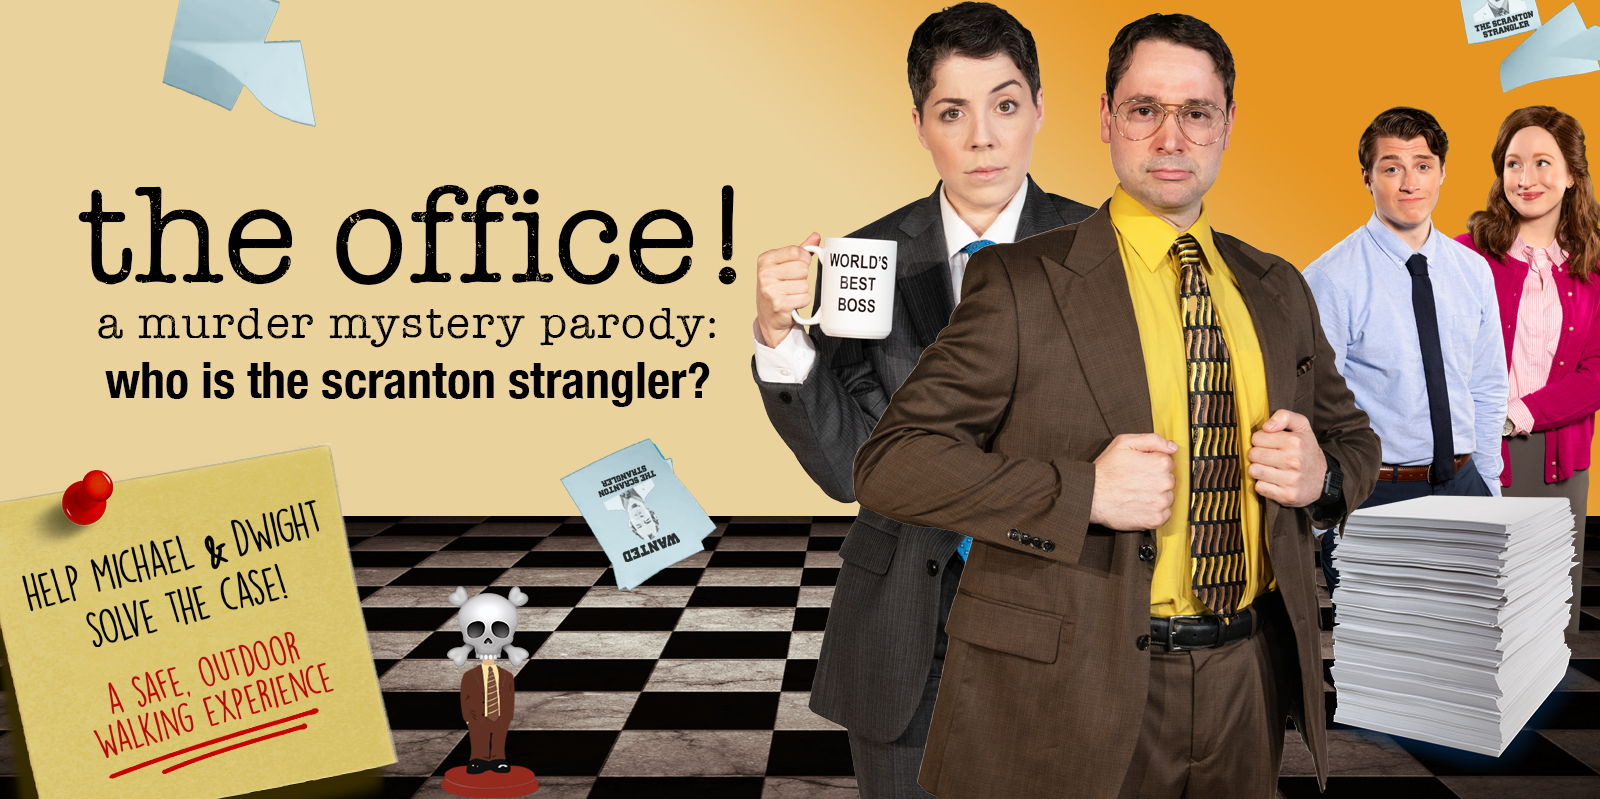 The Office! A Murder Mystery Parody: Who is the Scranton Strangler? promotional image